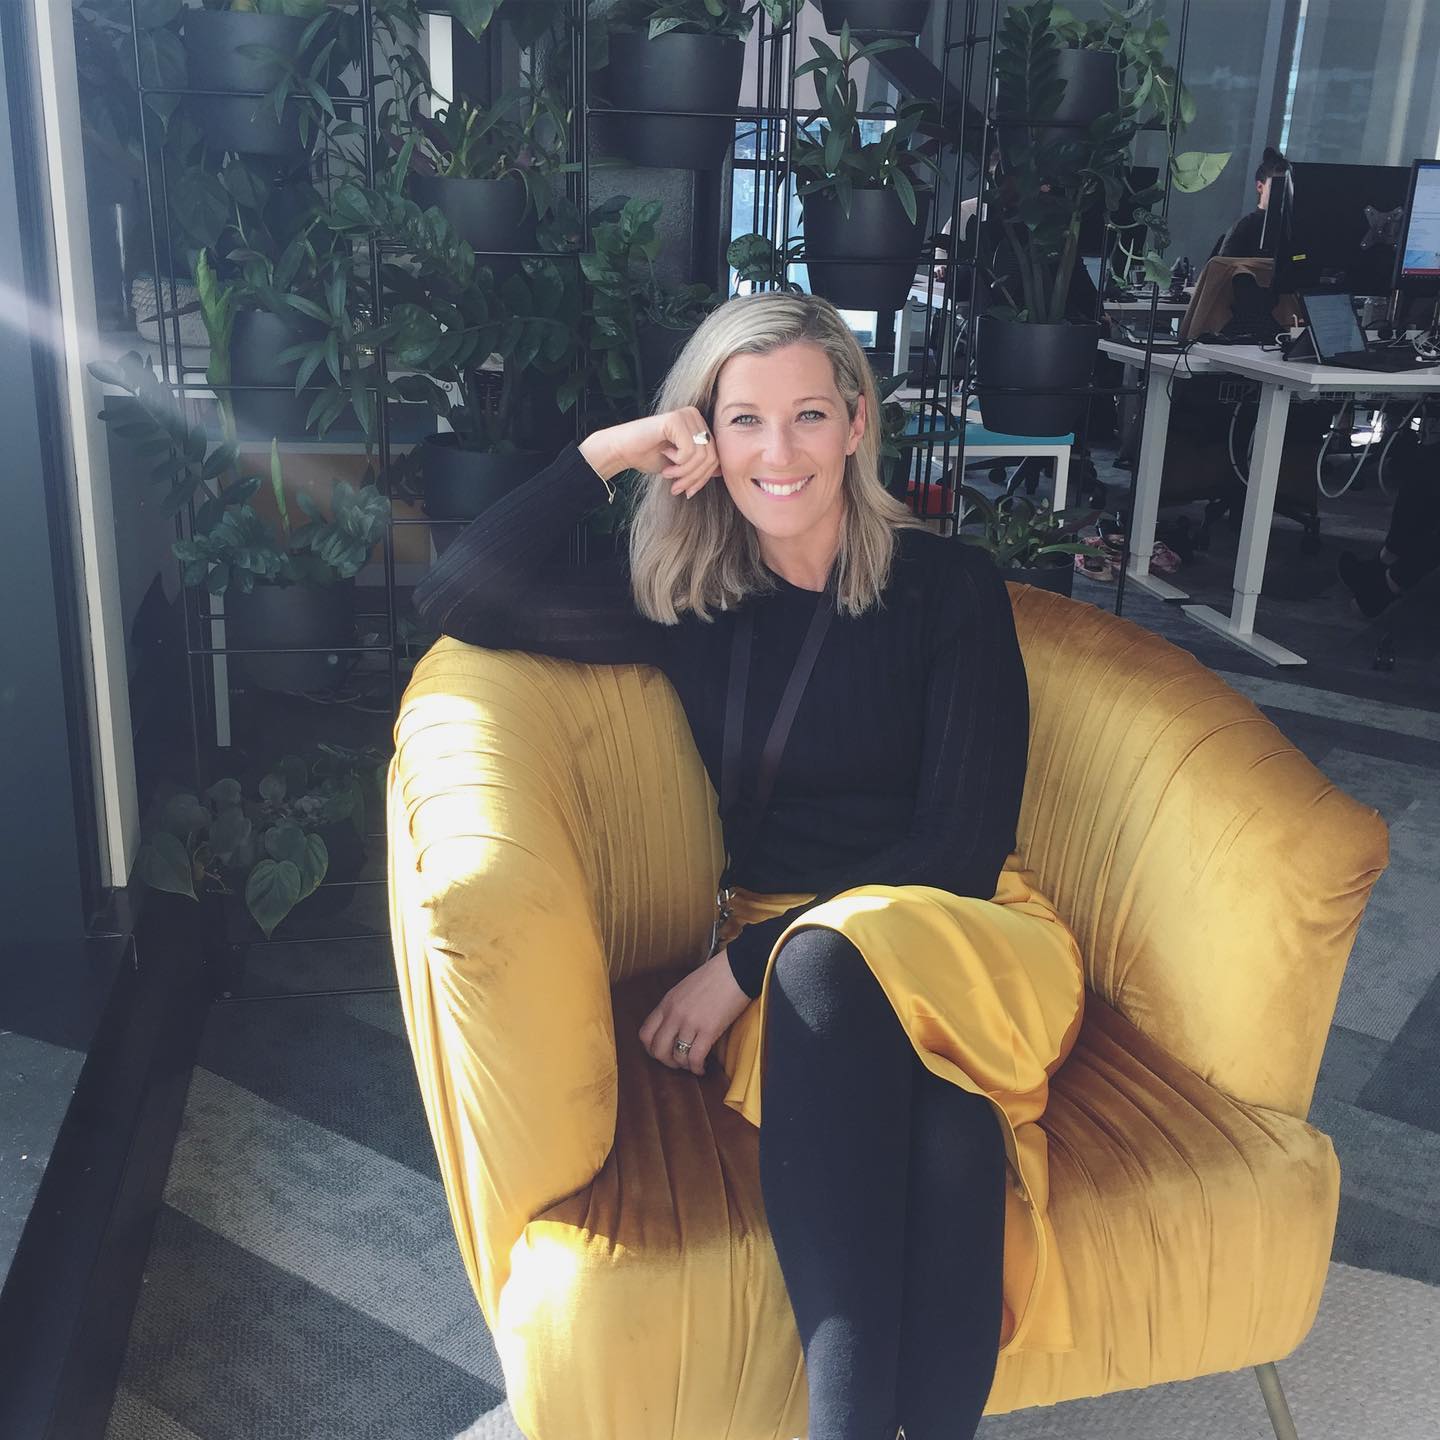 Sarah Geel, Head of Integrated Communications, shares her thoughts on her new role and nine years at Anthem